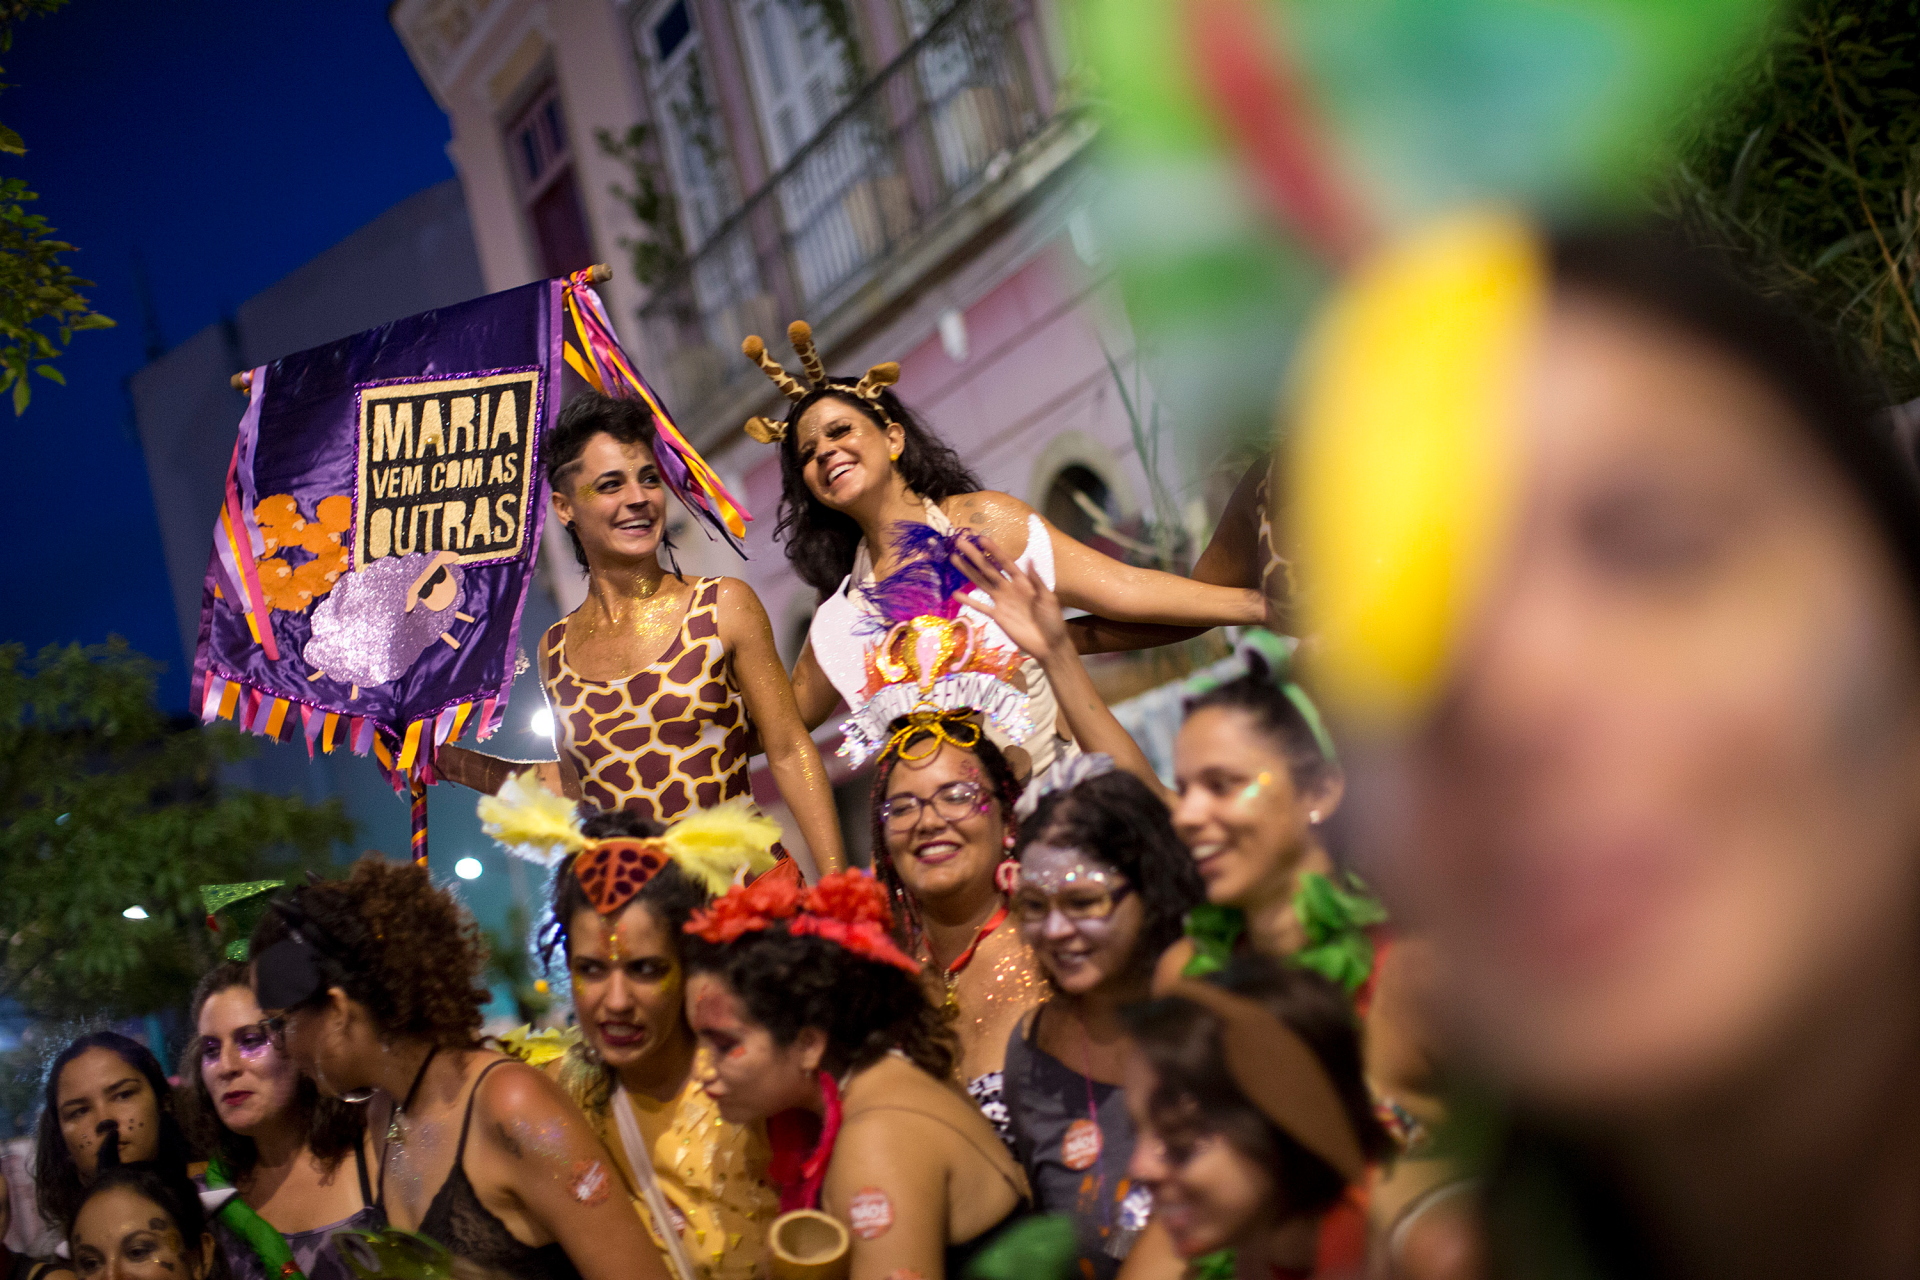 Women at Brazil Carnival: Skimpy garb does not allow groping